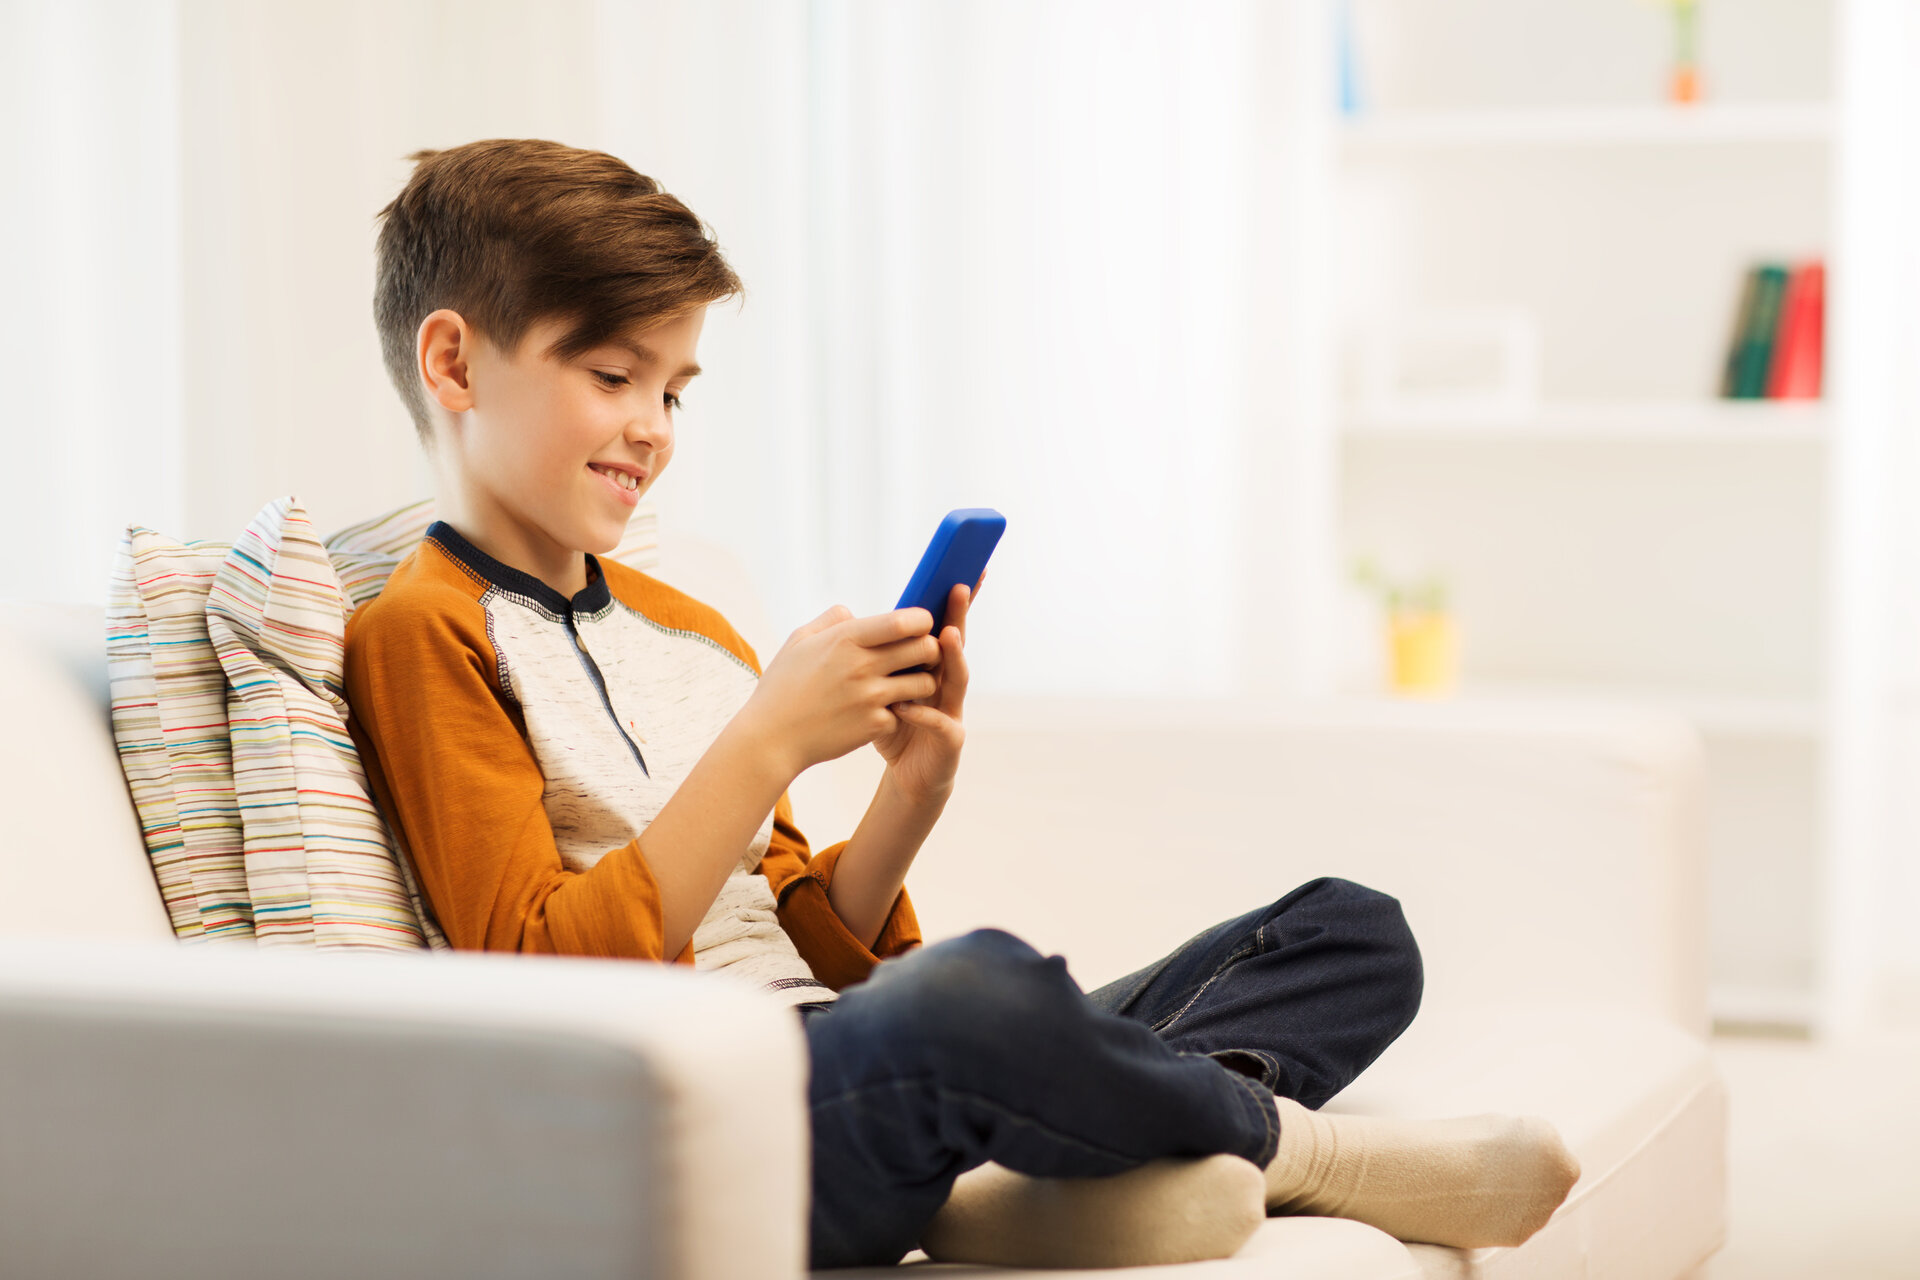 Young person playing on gaming app